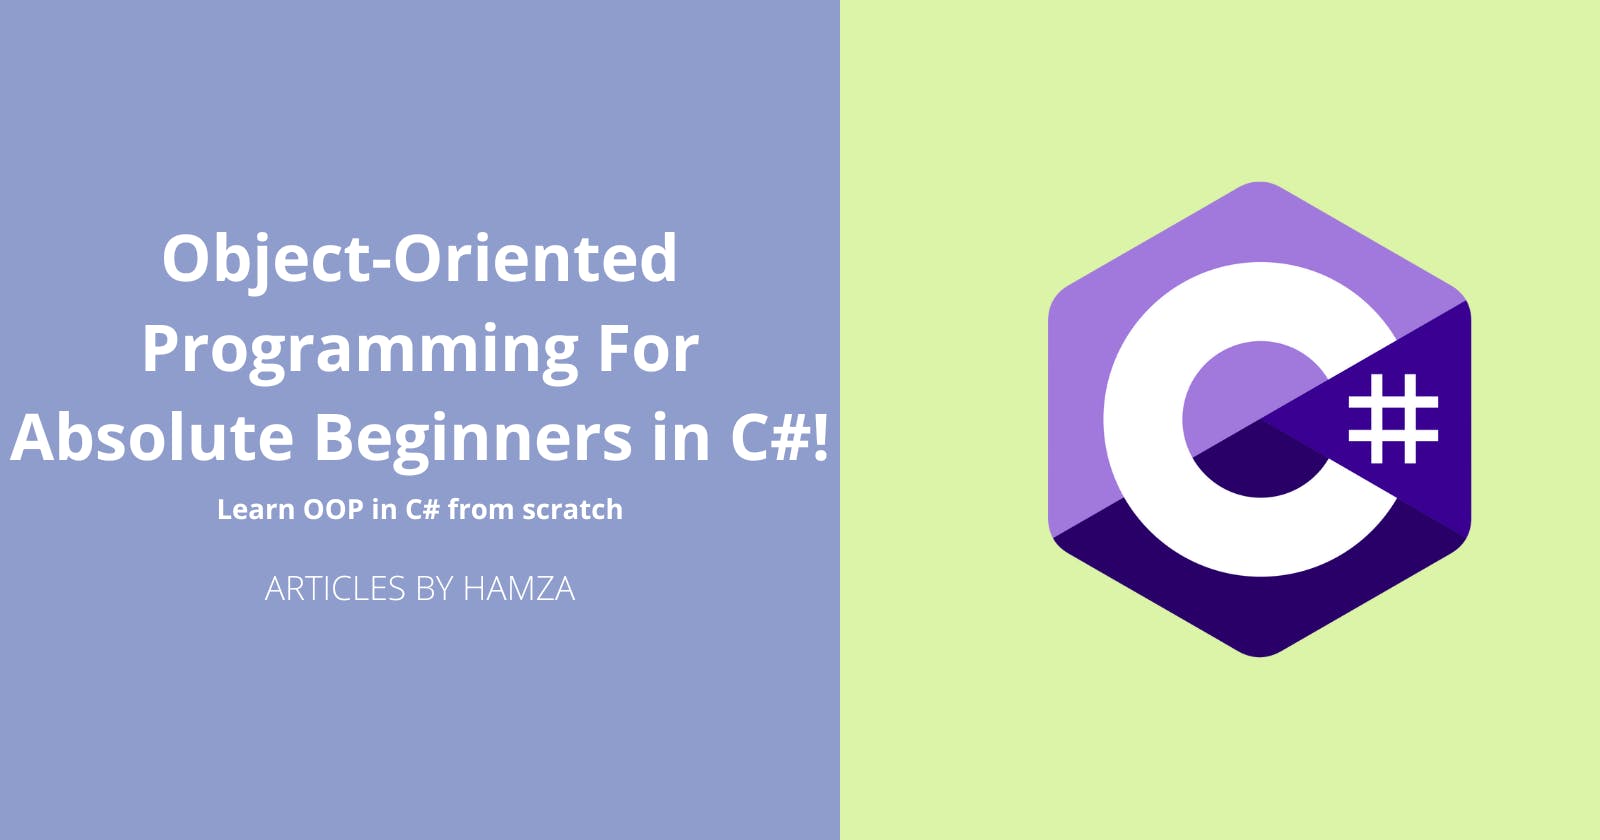 Object-Oriented Programming For Absolute Beginners in C#!